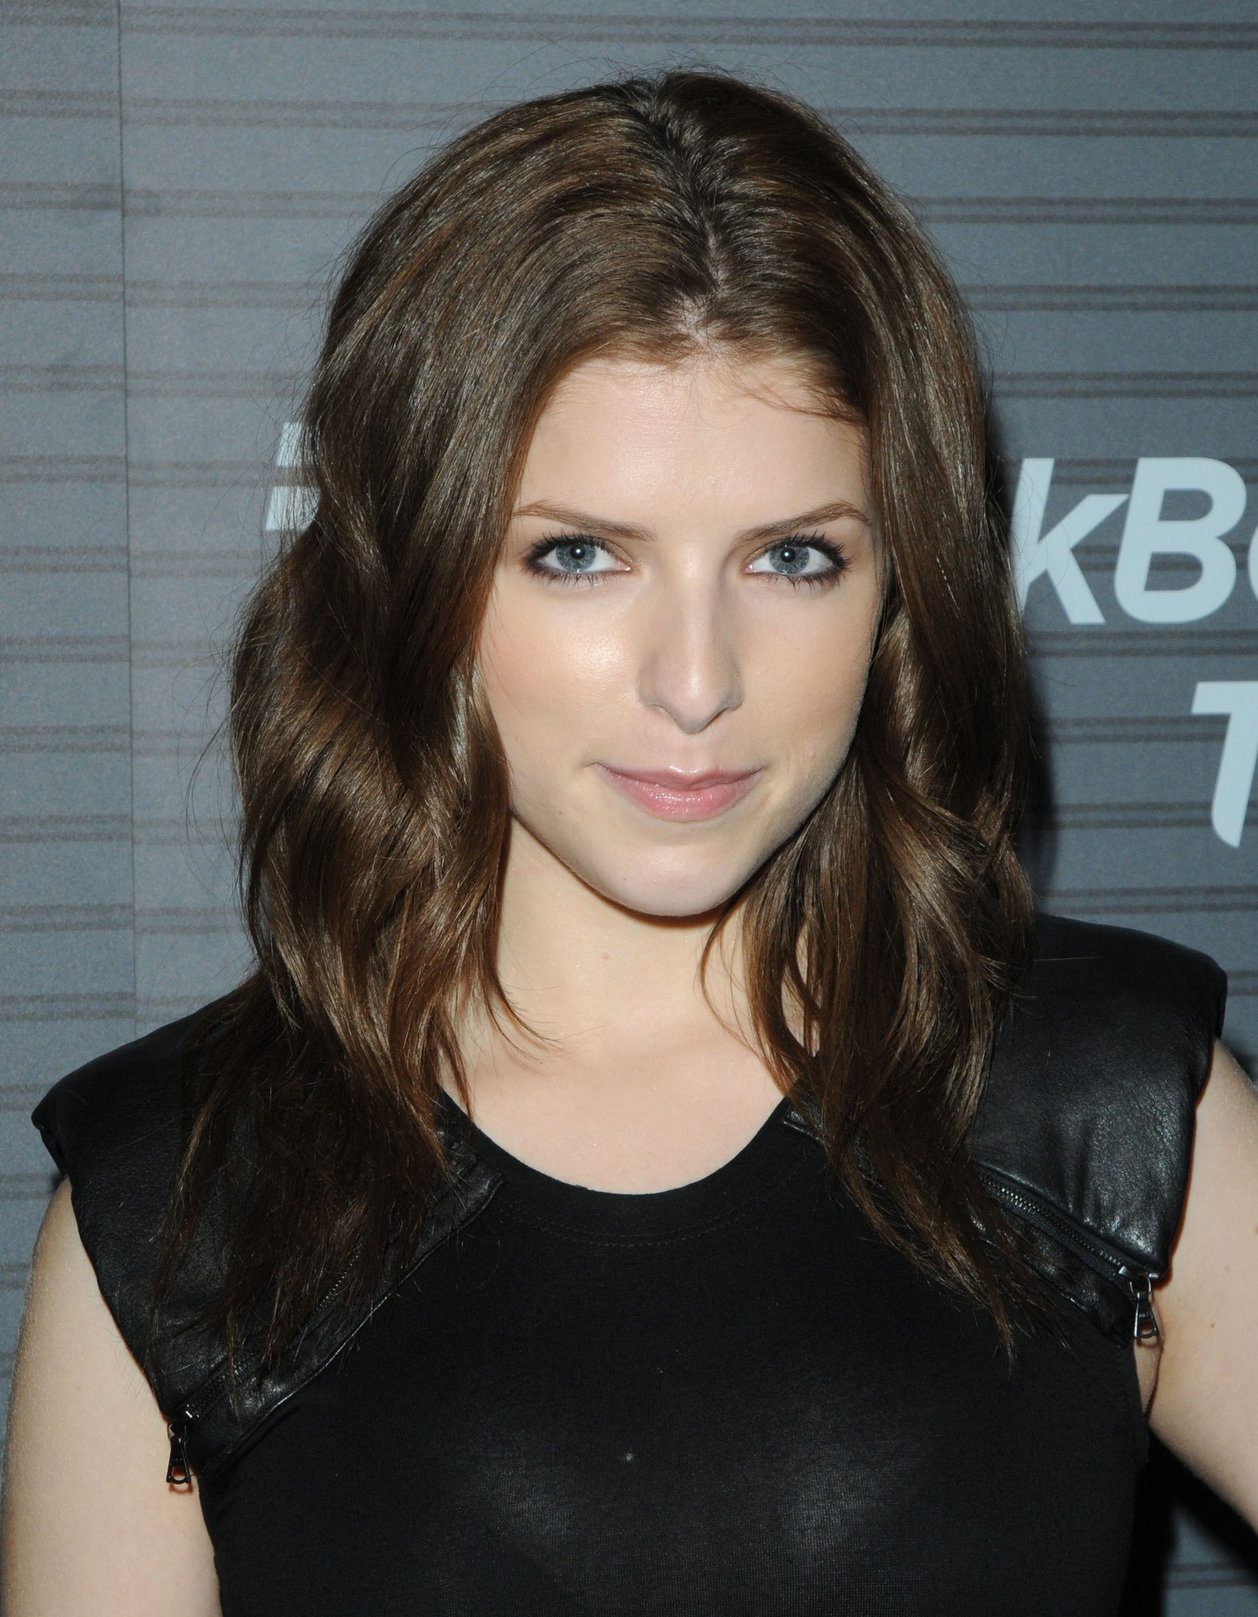 Anna Kendrick Pictures. Anna Kendrick Blackberry Torch launch party on ...